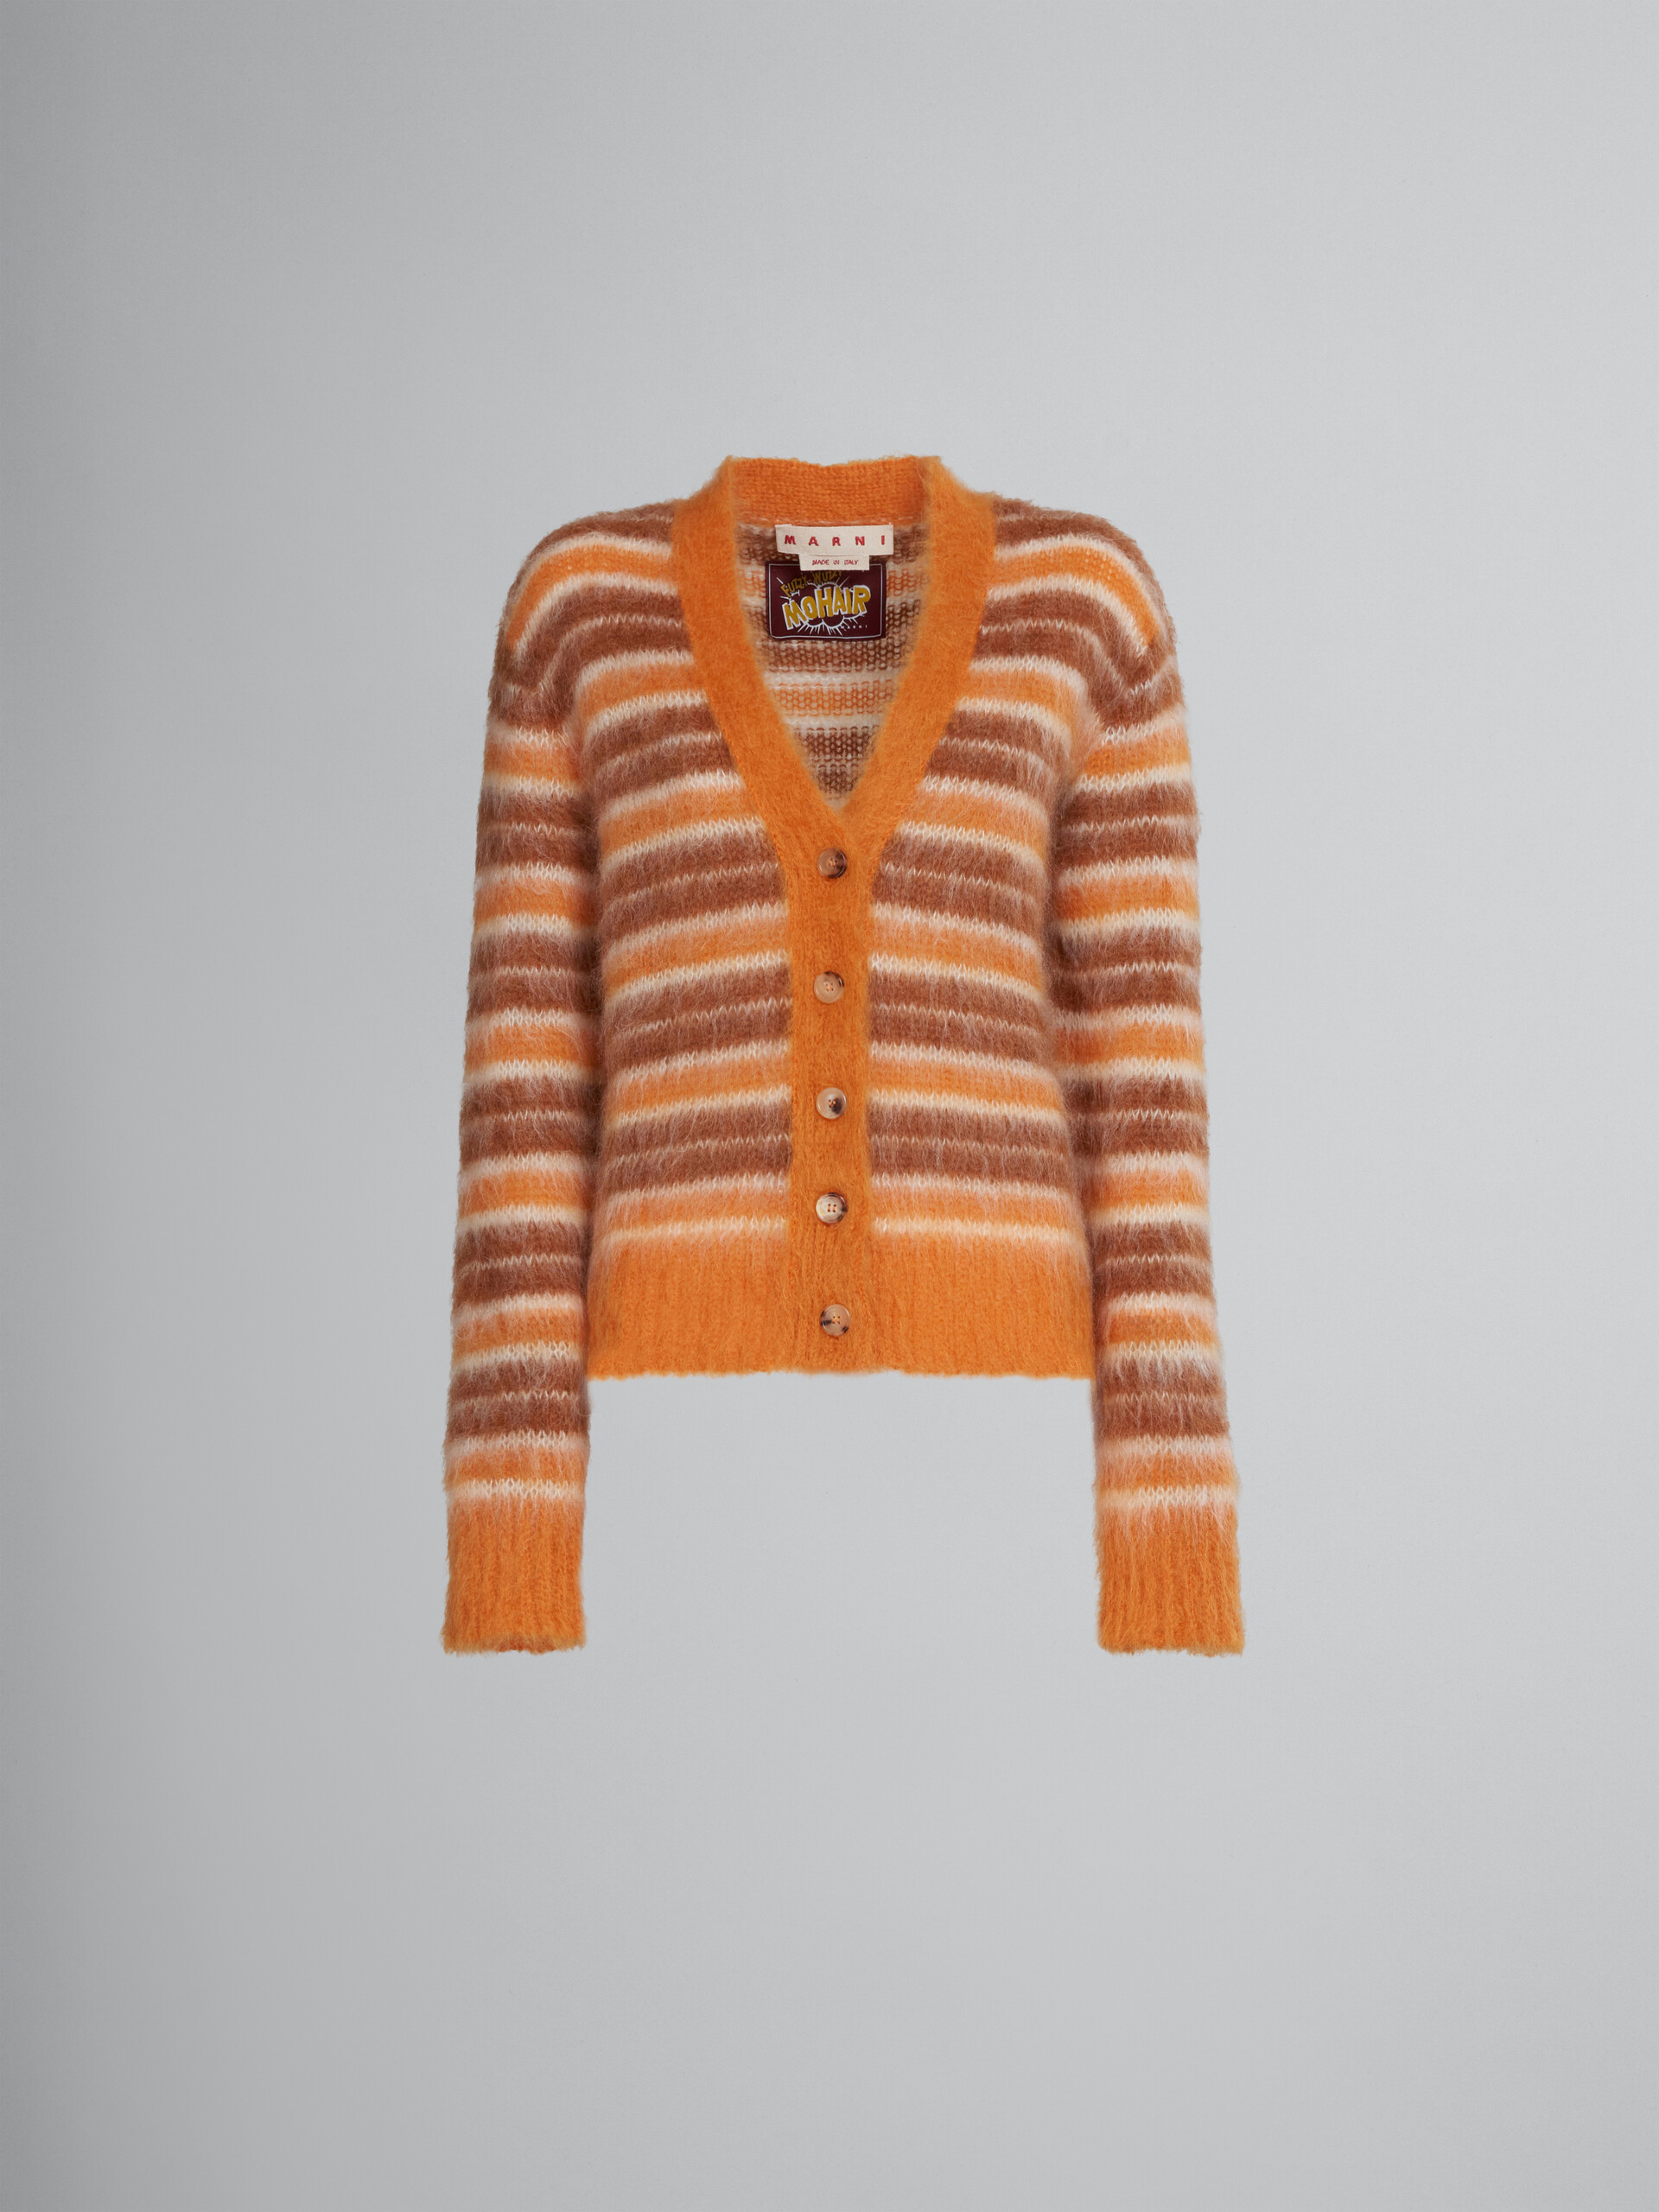 Mohair cardigan with orange stripes - Pullovers - Image 1